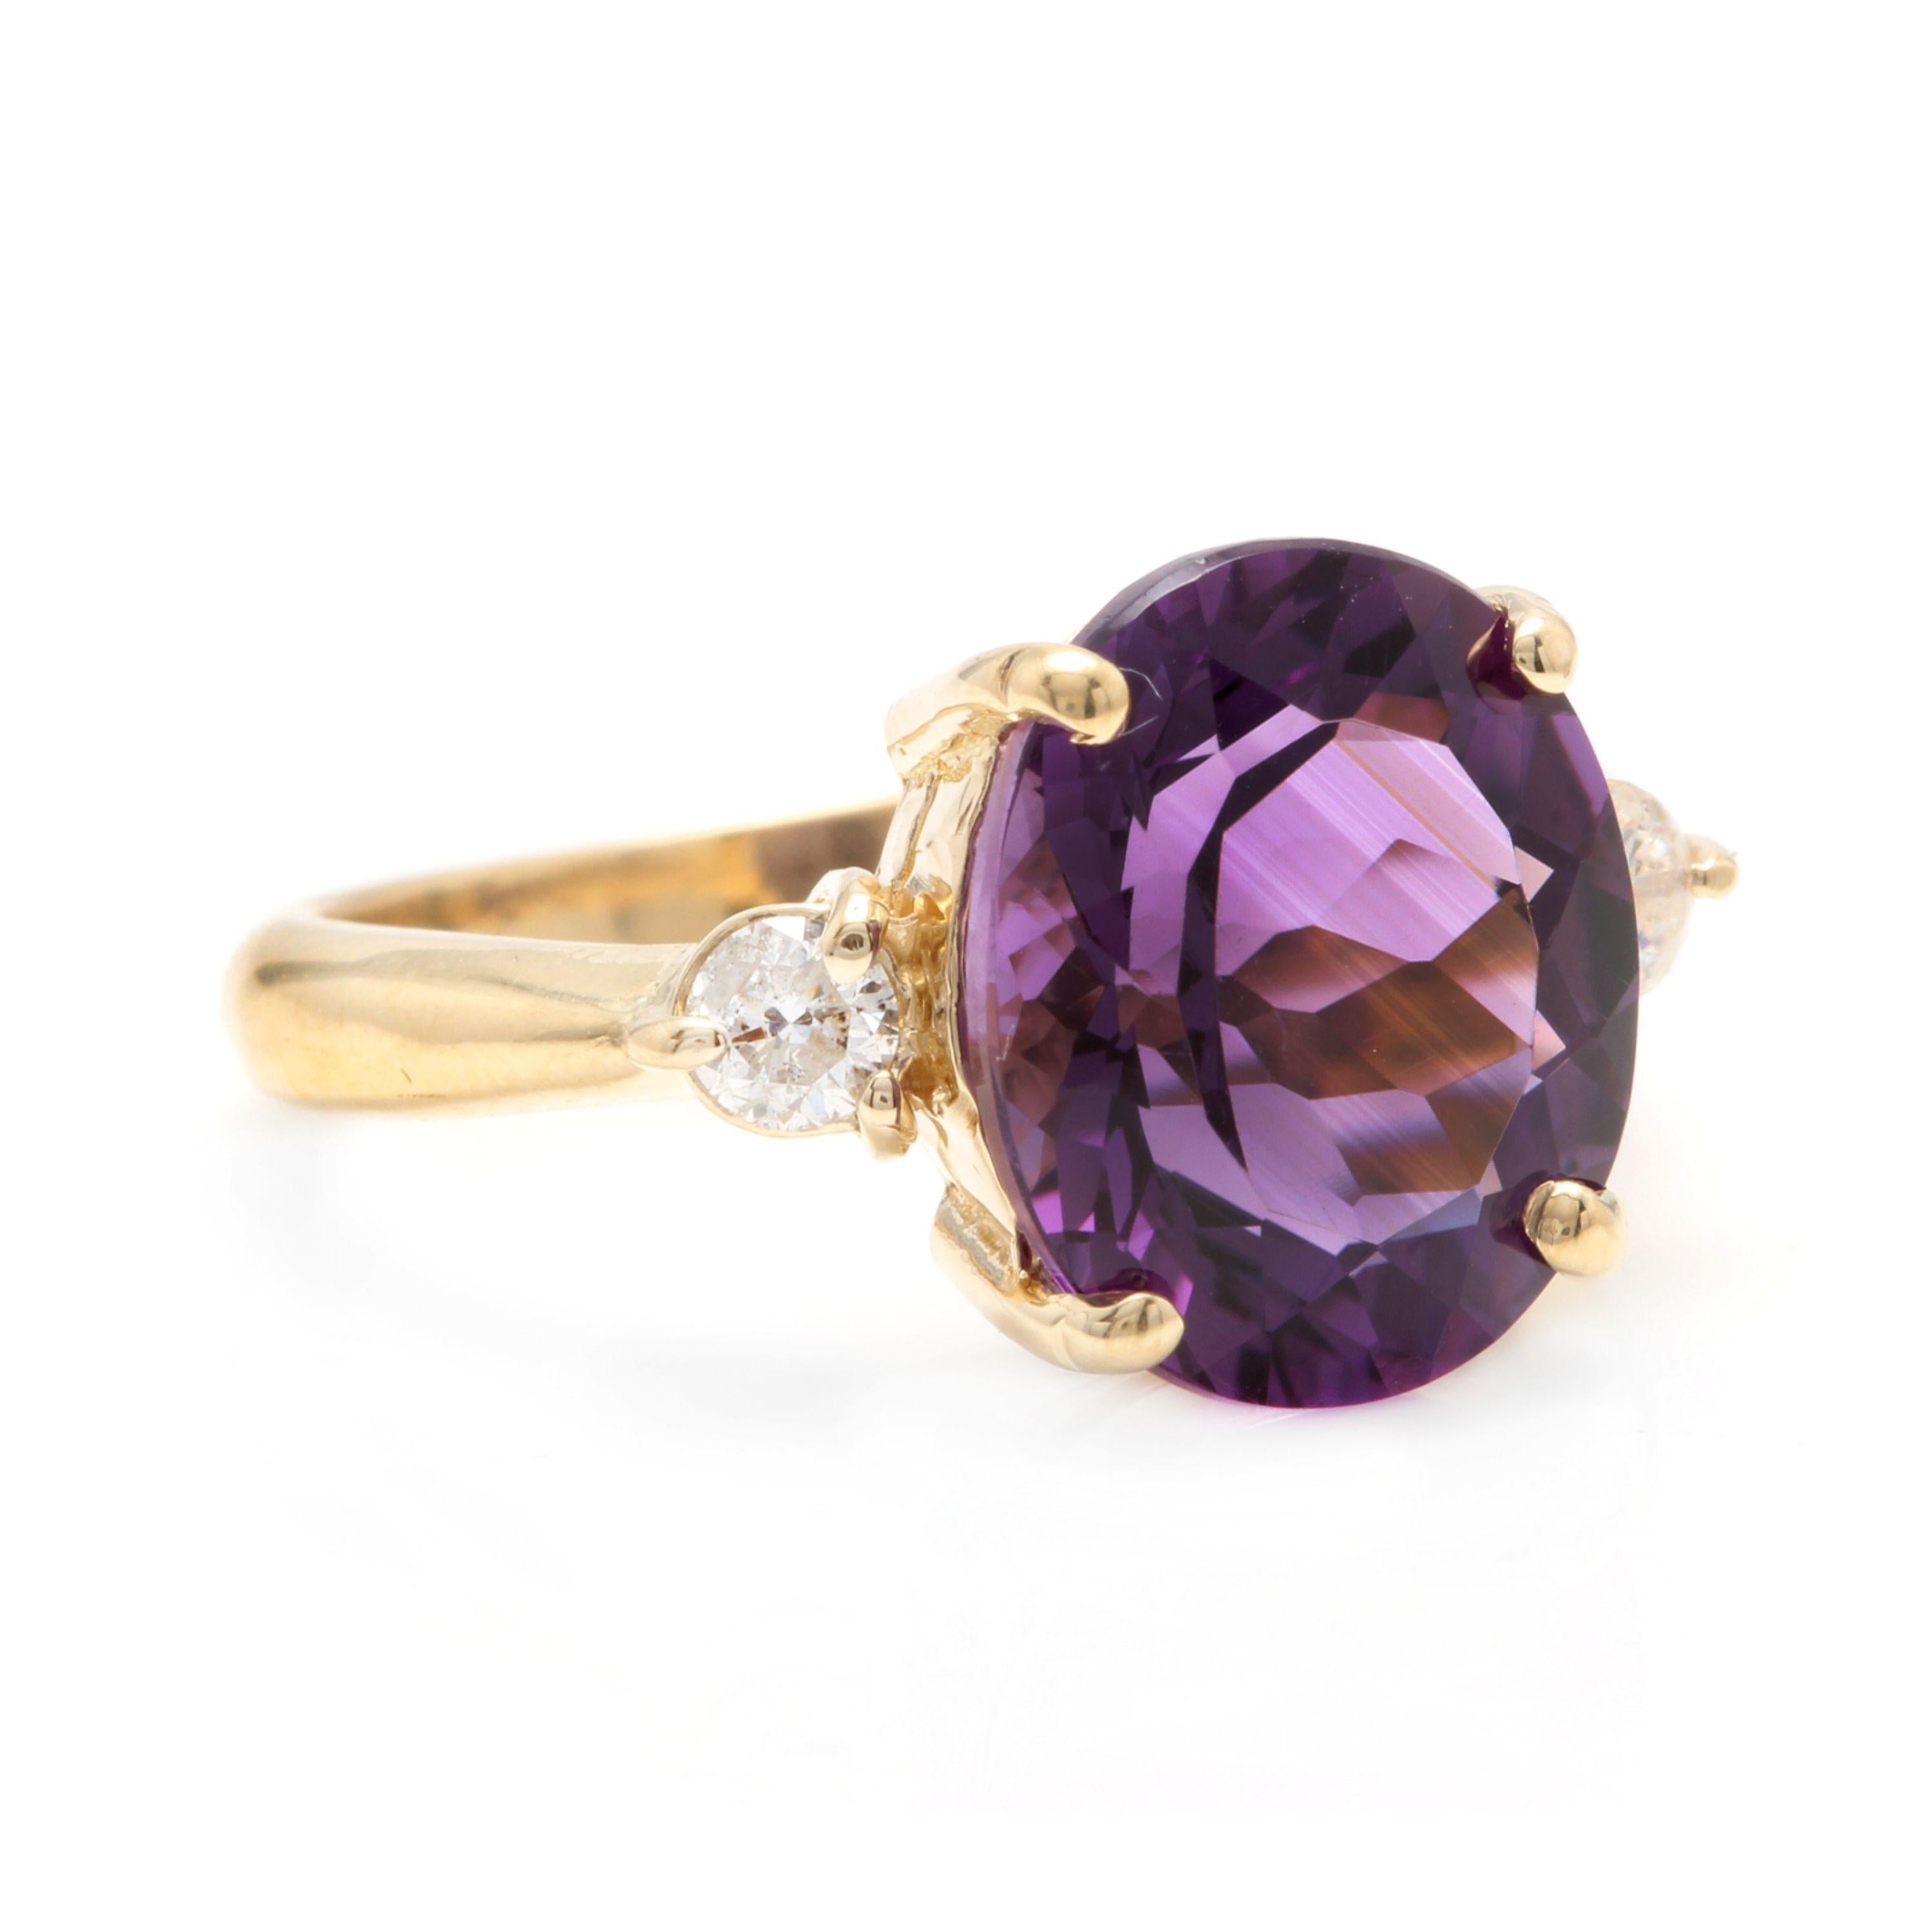 5.24 Carats Natural Impressive Amethyst and Diamond 14K Yellow Gold Ring

Total Natural Amethyst Weight: Approx. 5.00 Carats

Amethyst Measures: Approx. 12 x 10mm

Natural Round Diamonds Weight: Approx. 0.24 Carats (color G-H / Clarity